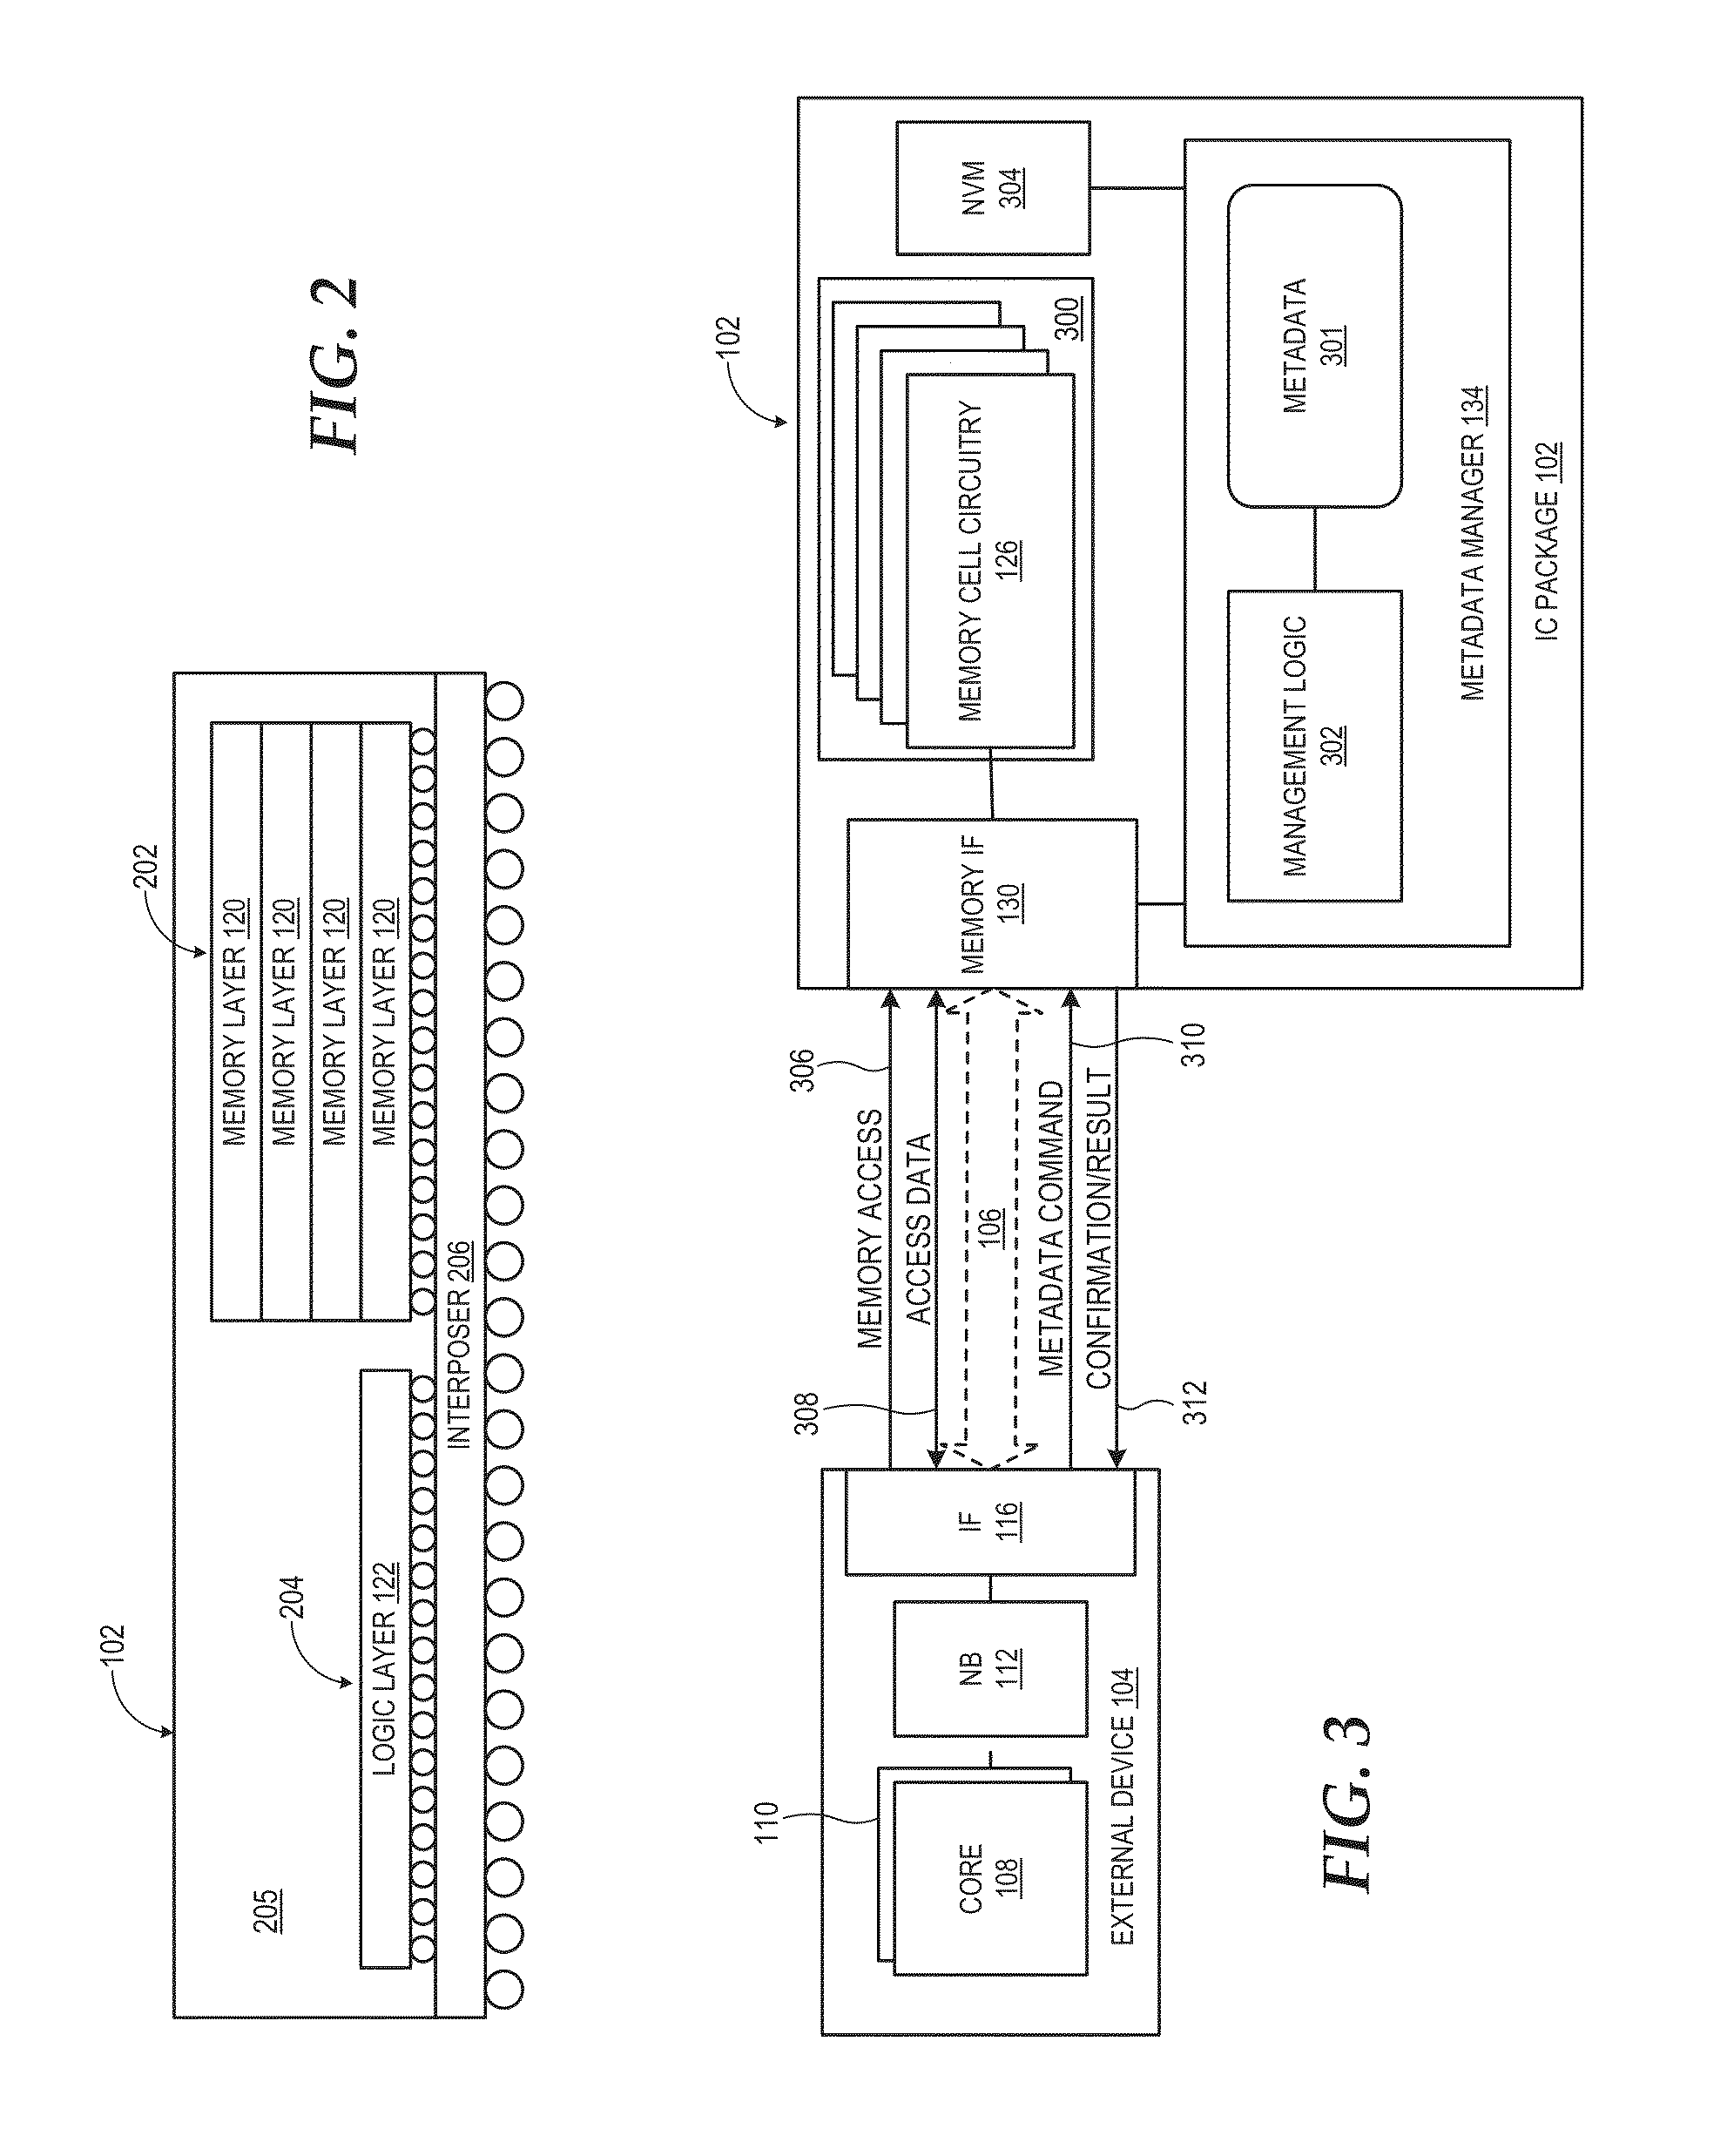 Stacked memory device with metadata mangement